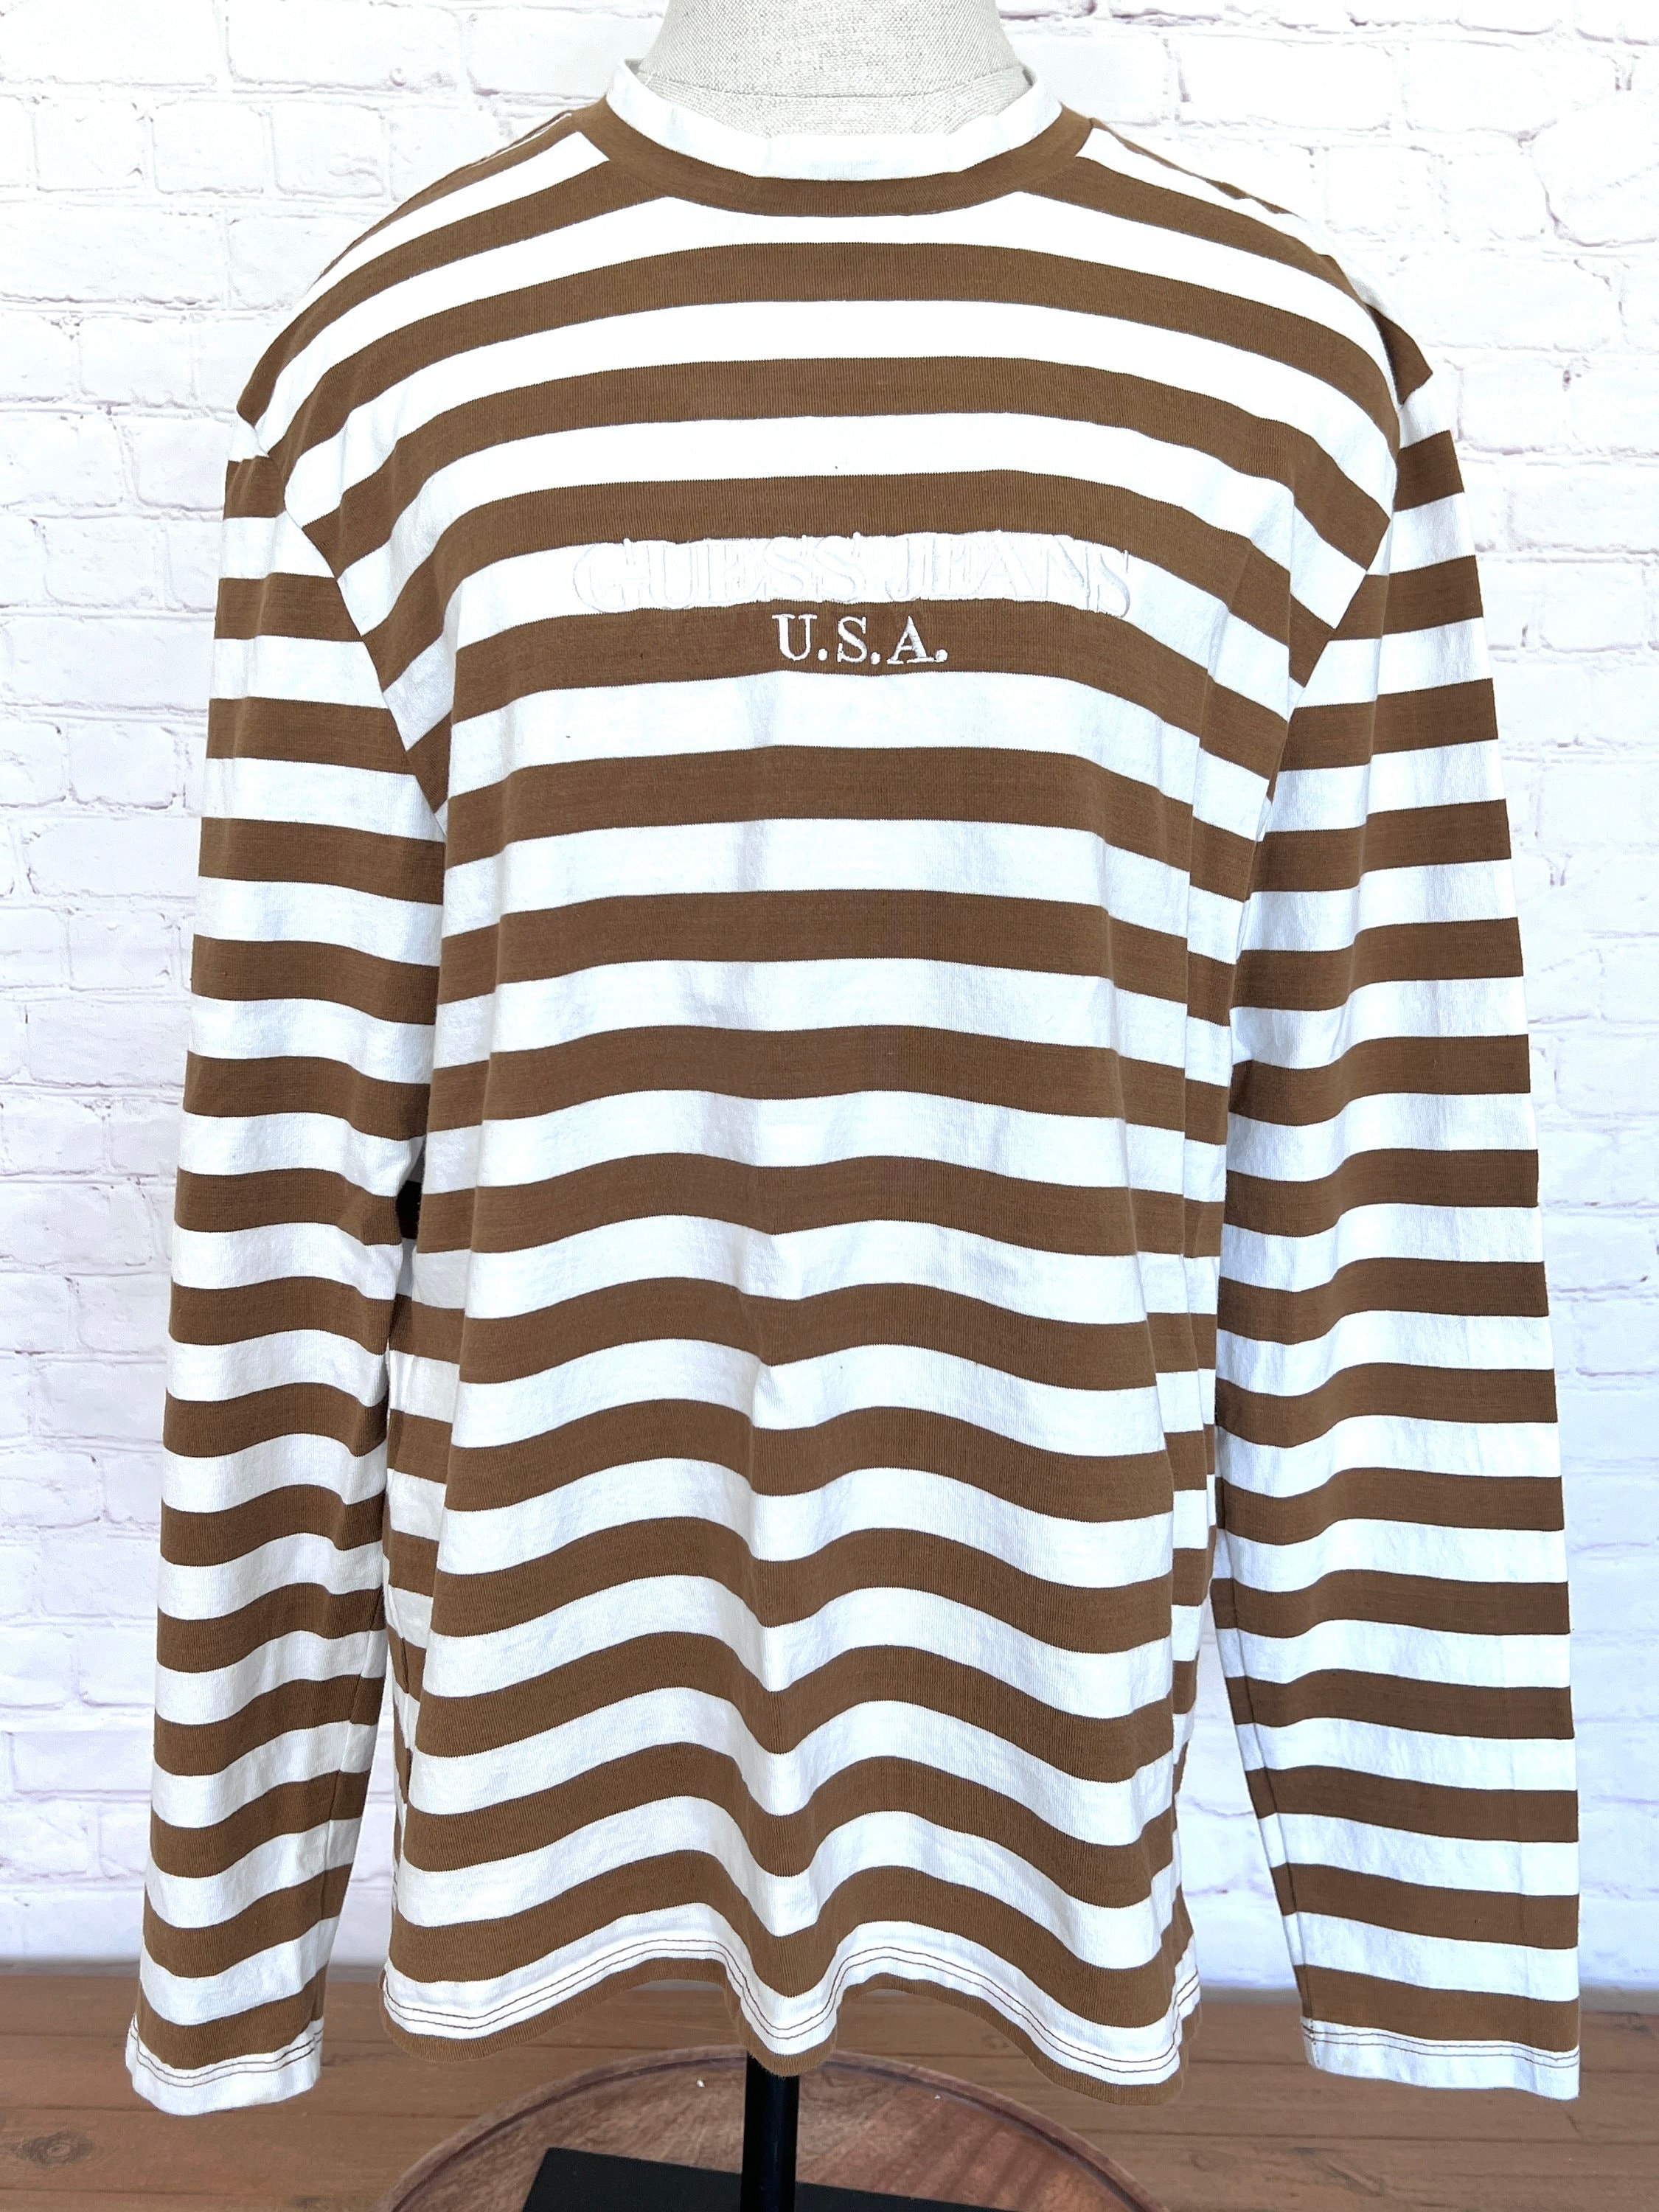 90's Guess Striped Tshirt Long Sleeve Brown & White Etsy